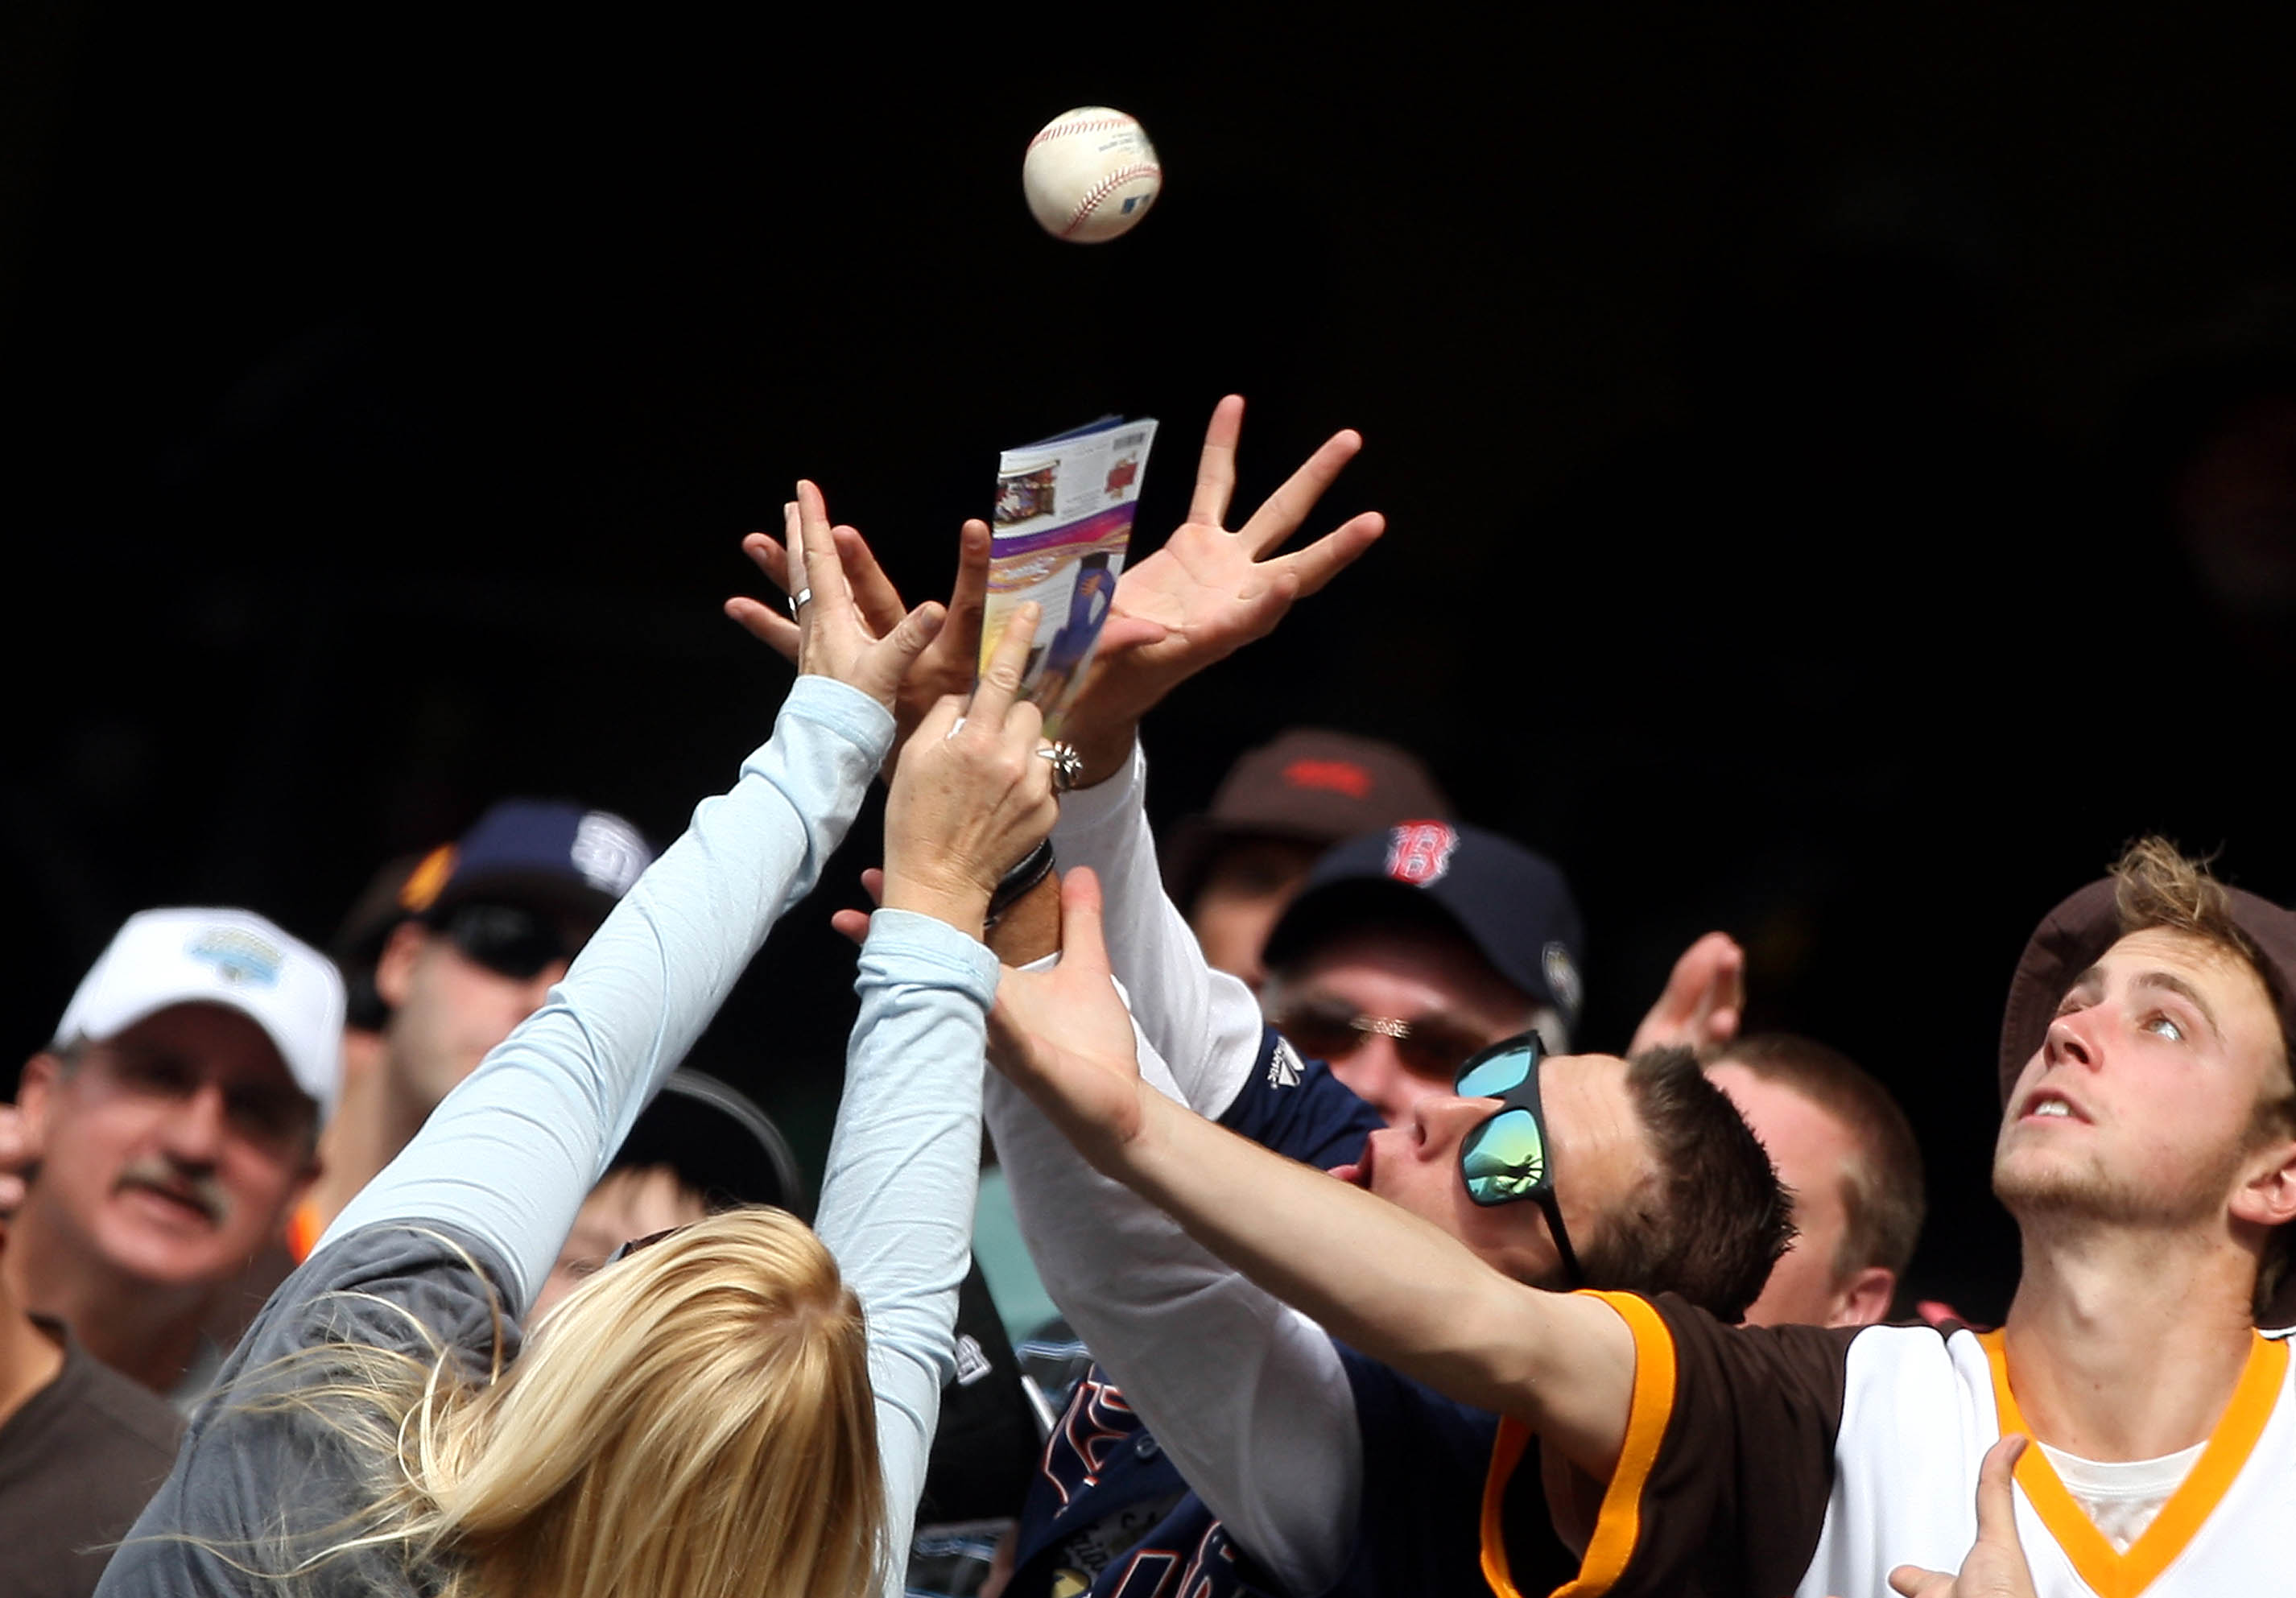 SAN DIEGO - APRIL 15:  Fans reach for a fly ball during a game between the Atlanta Braves and the San Diego Padres at Petco Park on April 15, 2010 in San Diego, California. (Photo by Donald Miralle/Getty Images)